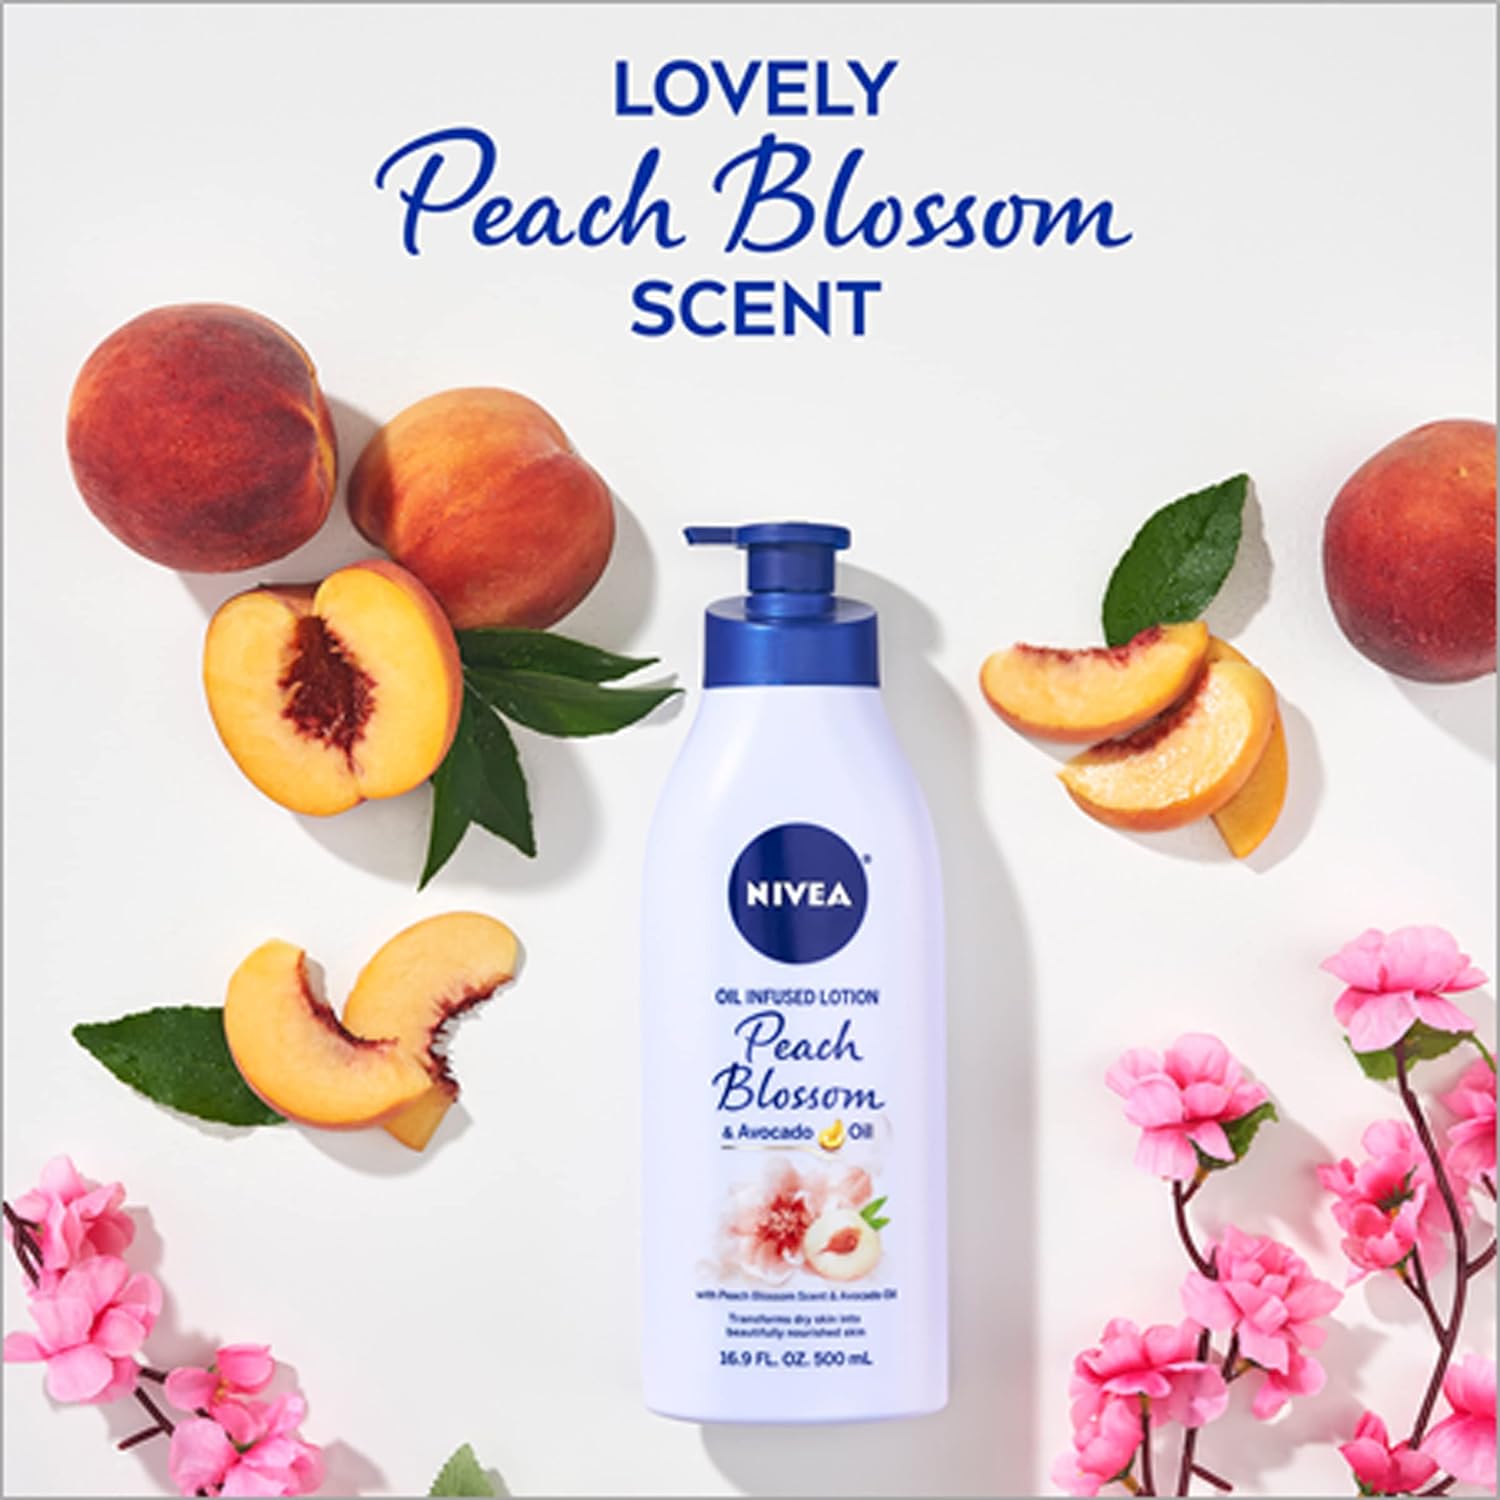 NIVEA Oil Infused Peach Blossom and Avocado Oil Body Lotion, Body Lotion for Dry Skin, 16.9 Fl Oz Pack of 3 : Beauty & Personal Care